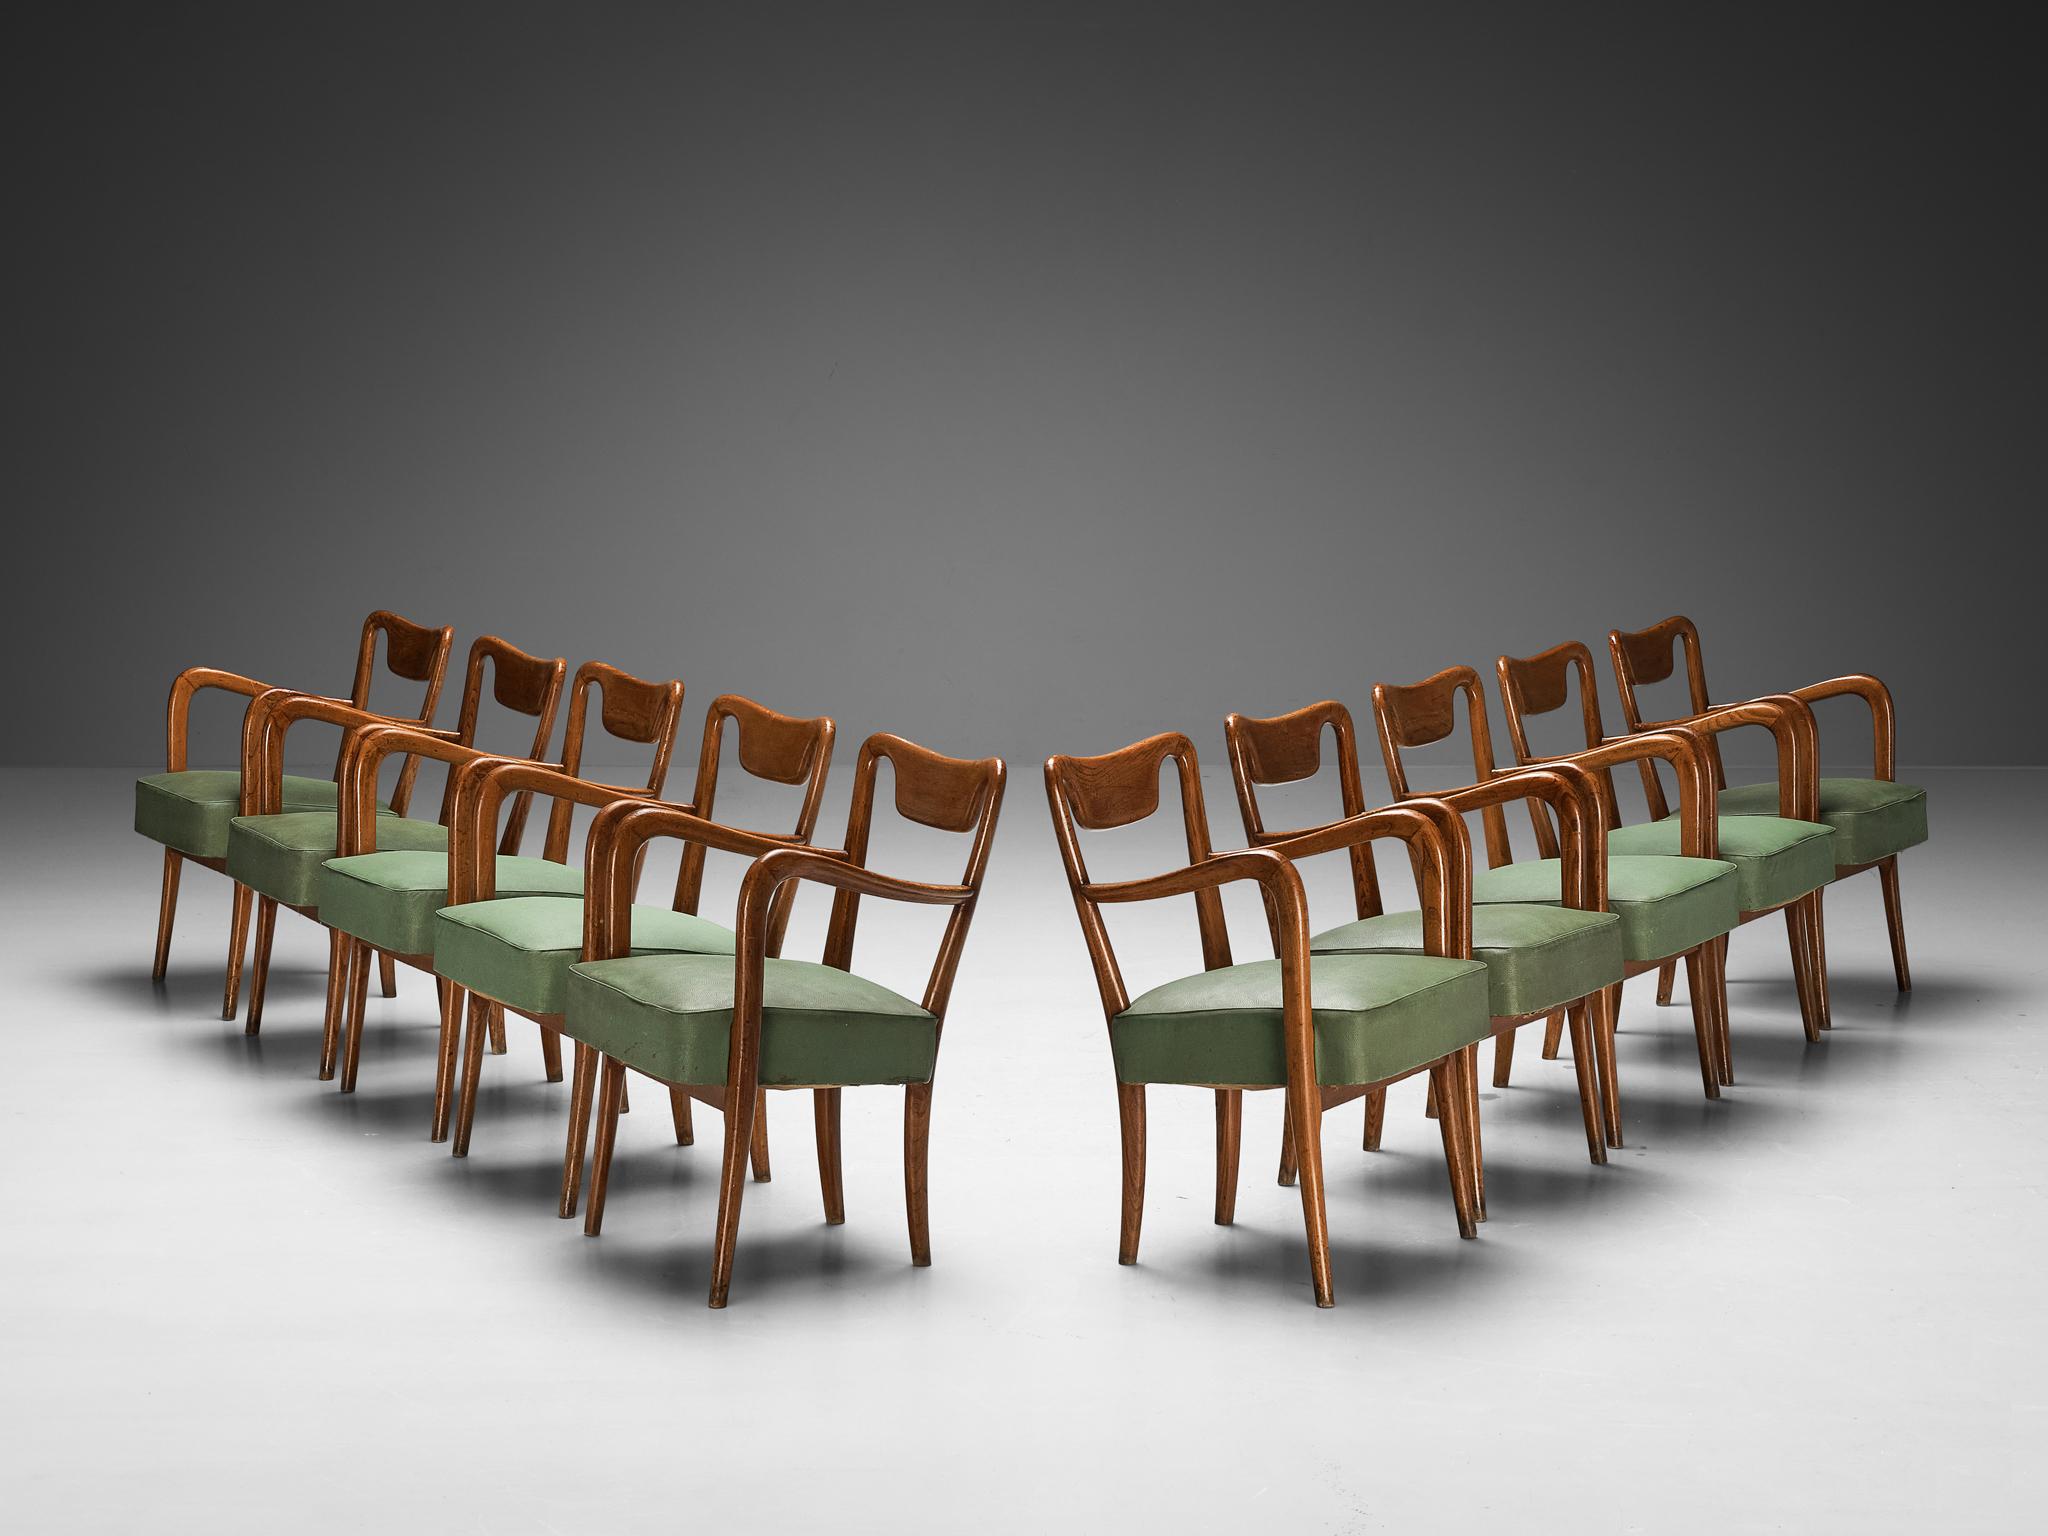 Set of ten dining chairs, teak, faux leather, Italy, 1940s

A splendid set of dining chairs originating from Italy during the 1940s. Admired for its intrinsic form and masterful craftsmanship, this design stands as a testament to the artisanal